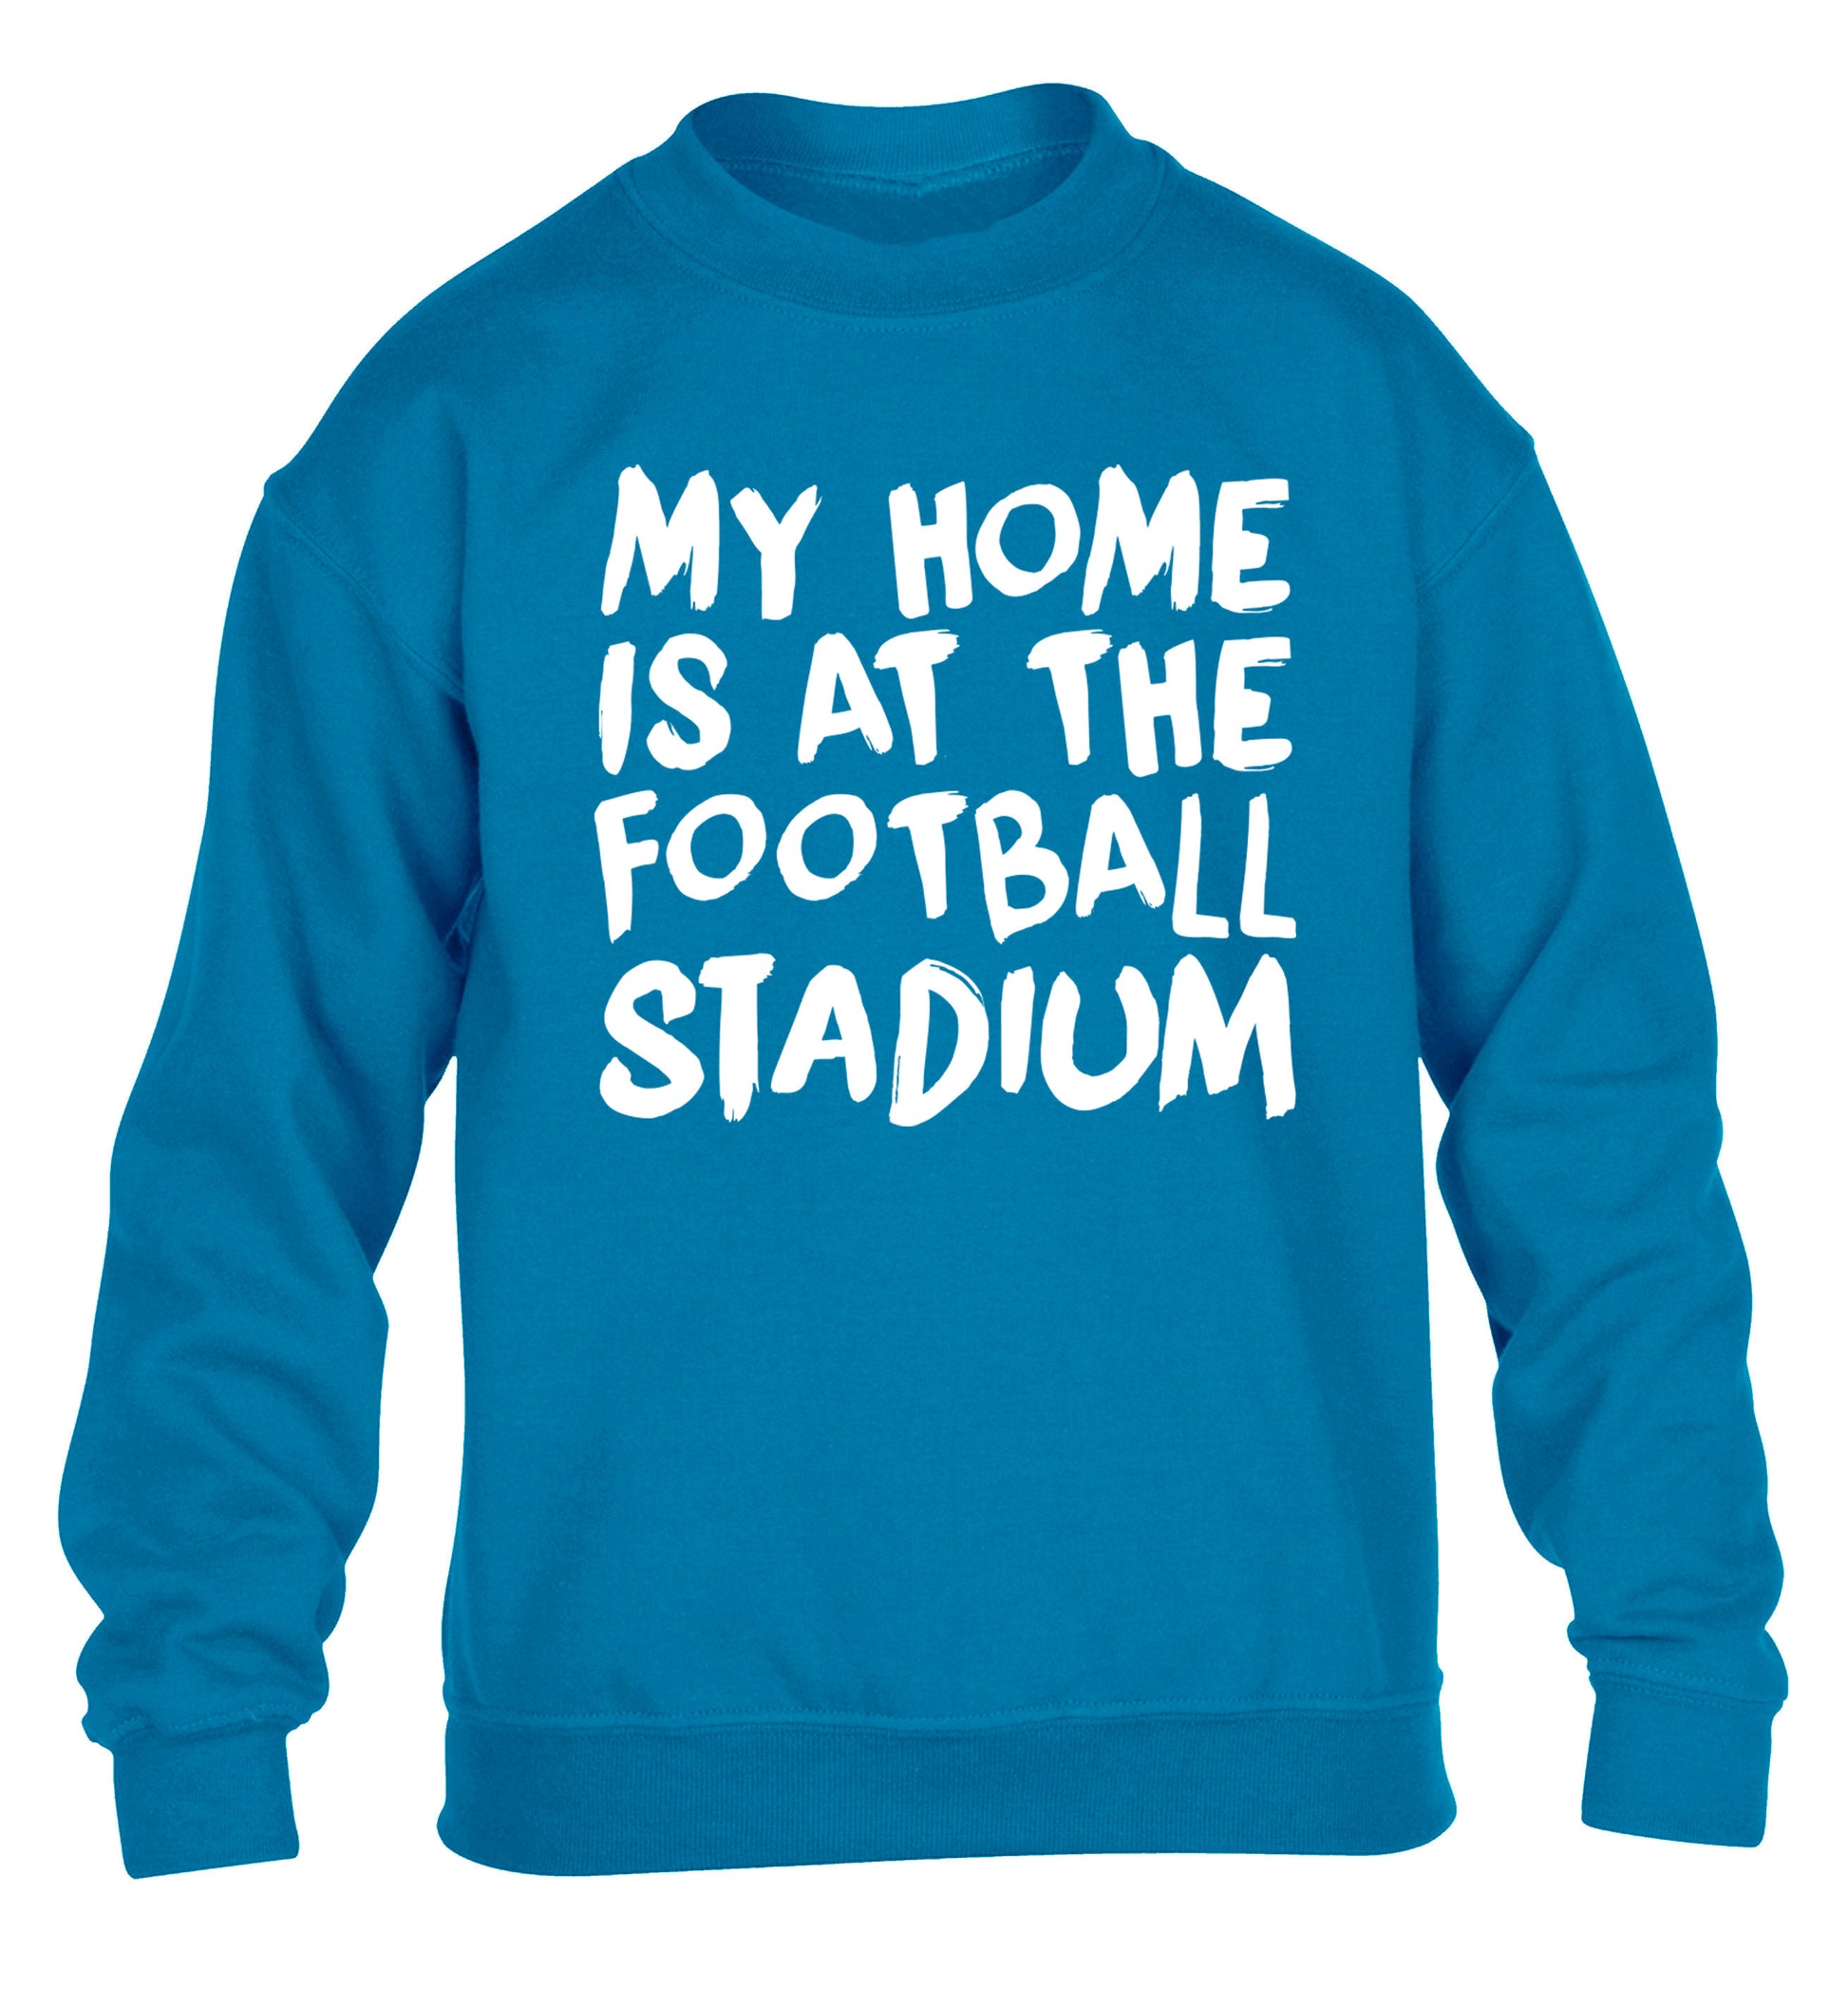 My home is at the football stadium children's blue sweater 12-14 Years